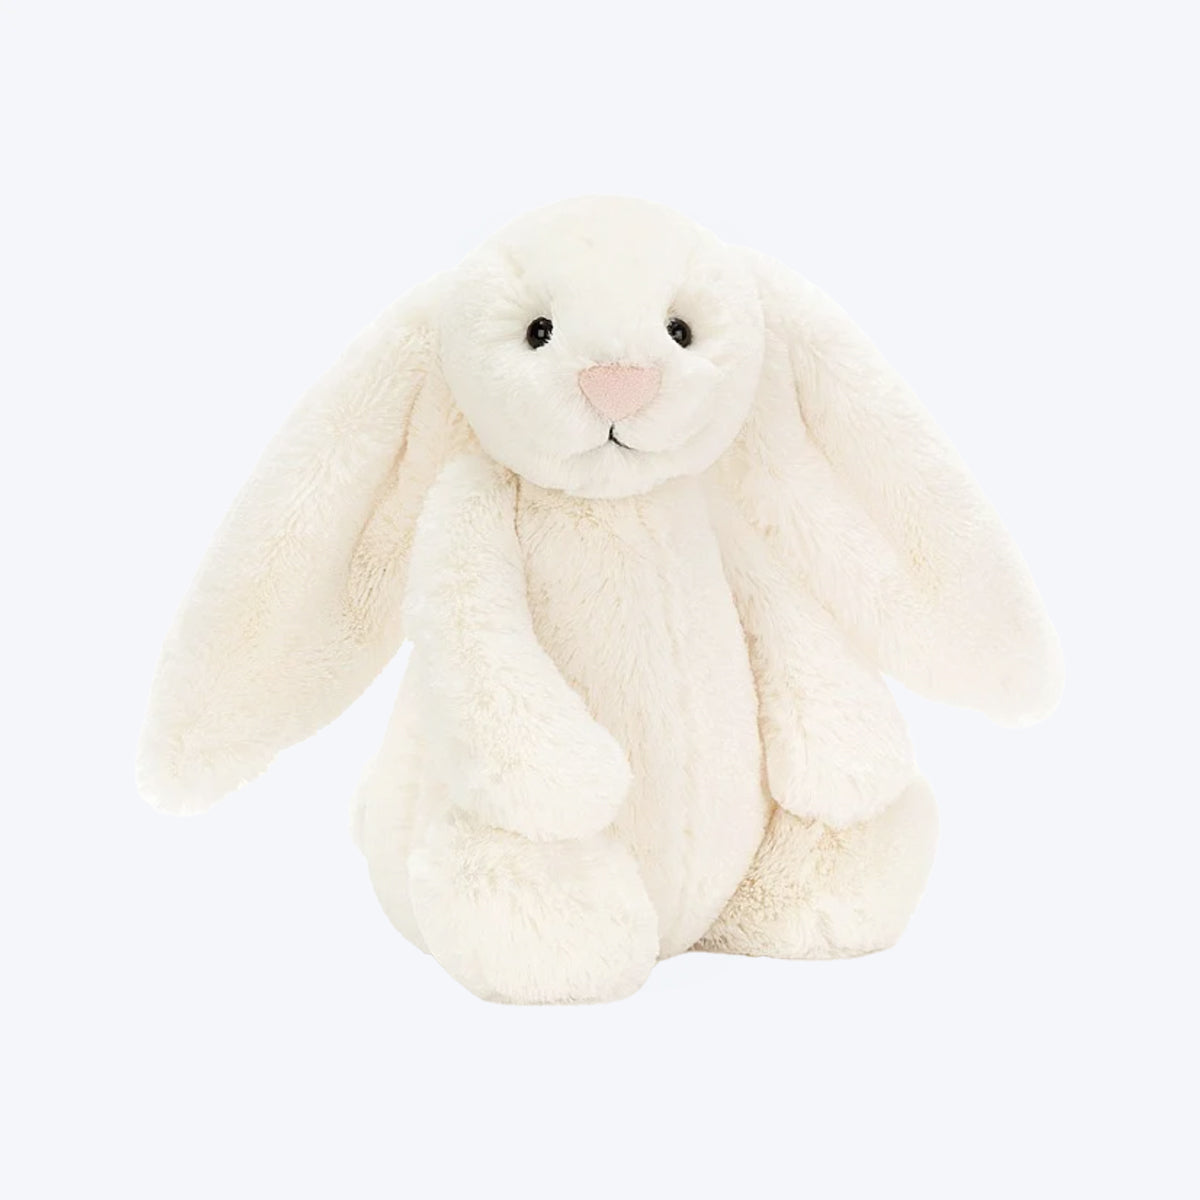 White bunny plushie from Jellycat London.